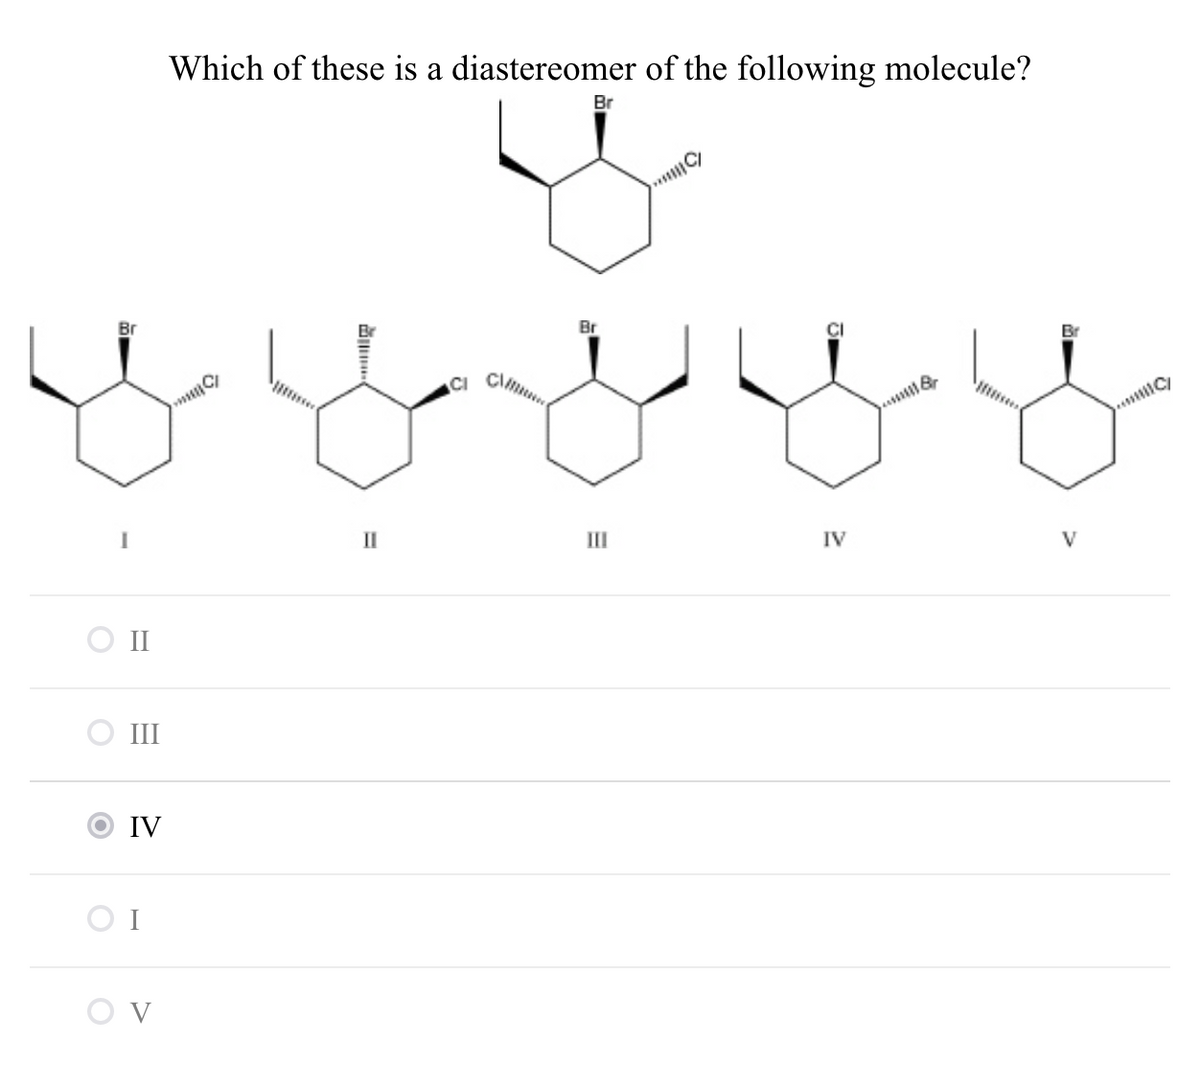 Which of these is a diastereomer of the following molecule?
Br
Br
Br
II
III
IV
V
II
III
IV
I
V
